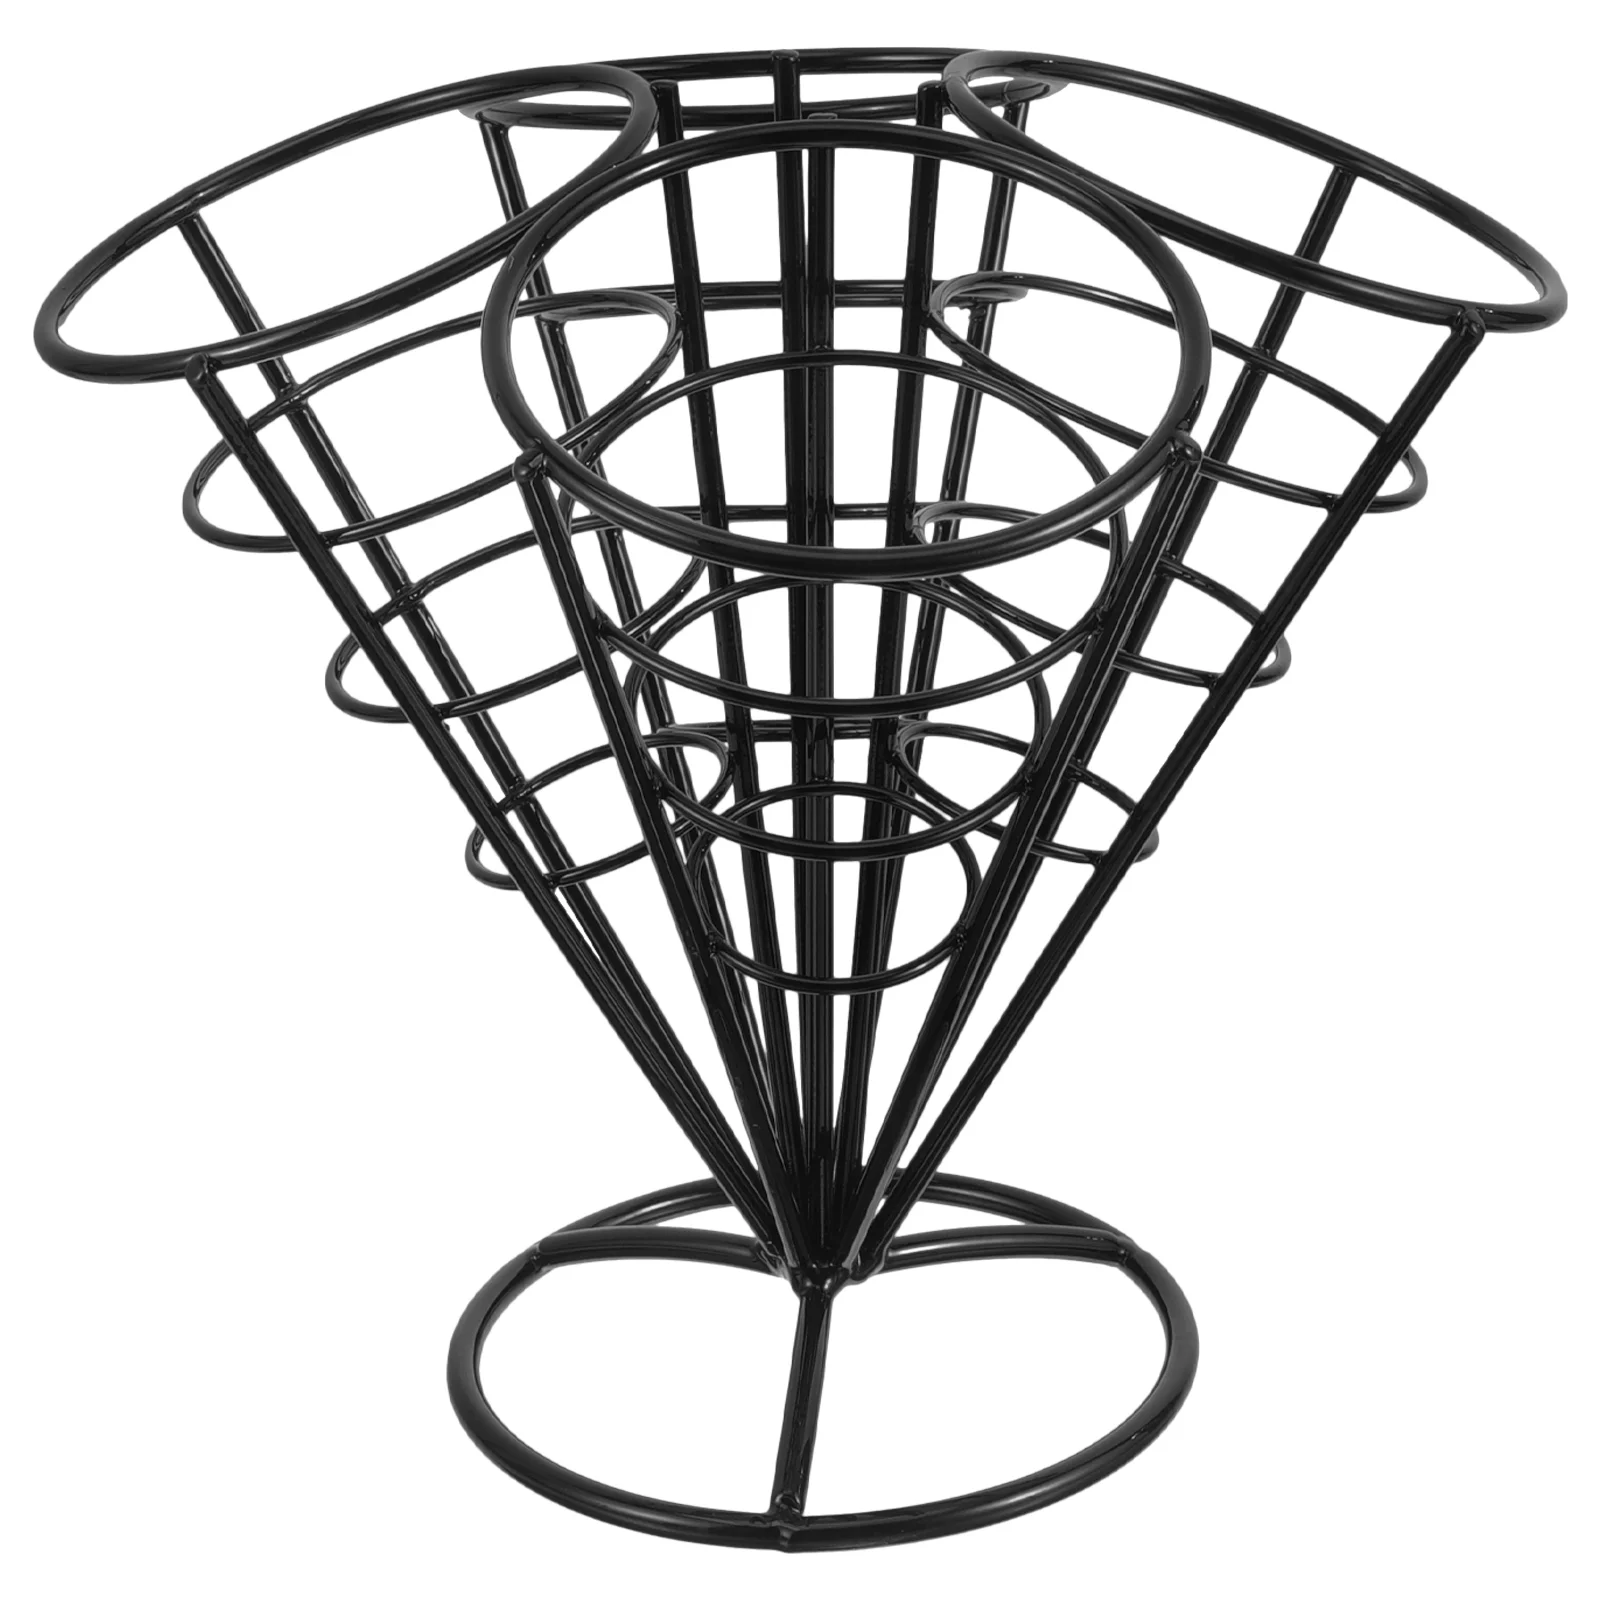 

French Fry Stand Cone Metal Wire Snack Basket Creative Appetizer Serving Rack for Party Gathering(4 Holes Type)